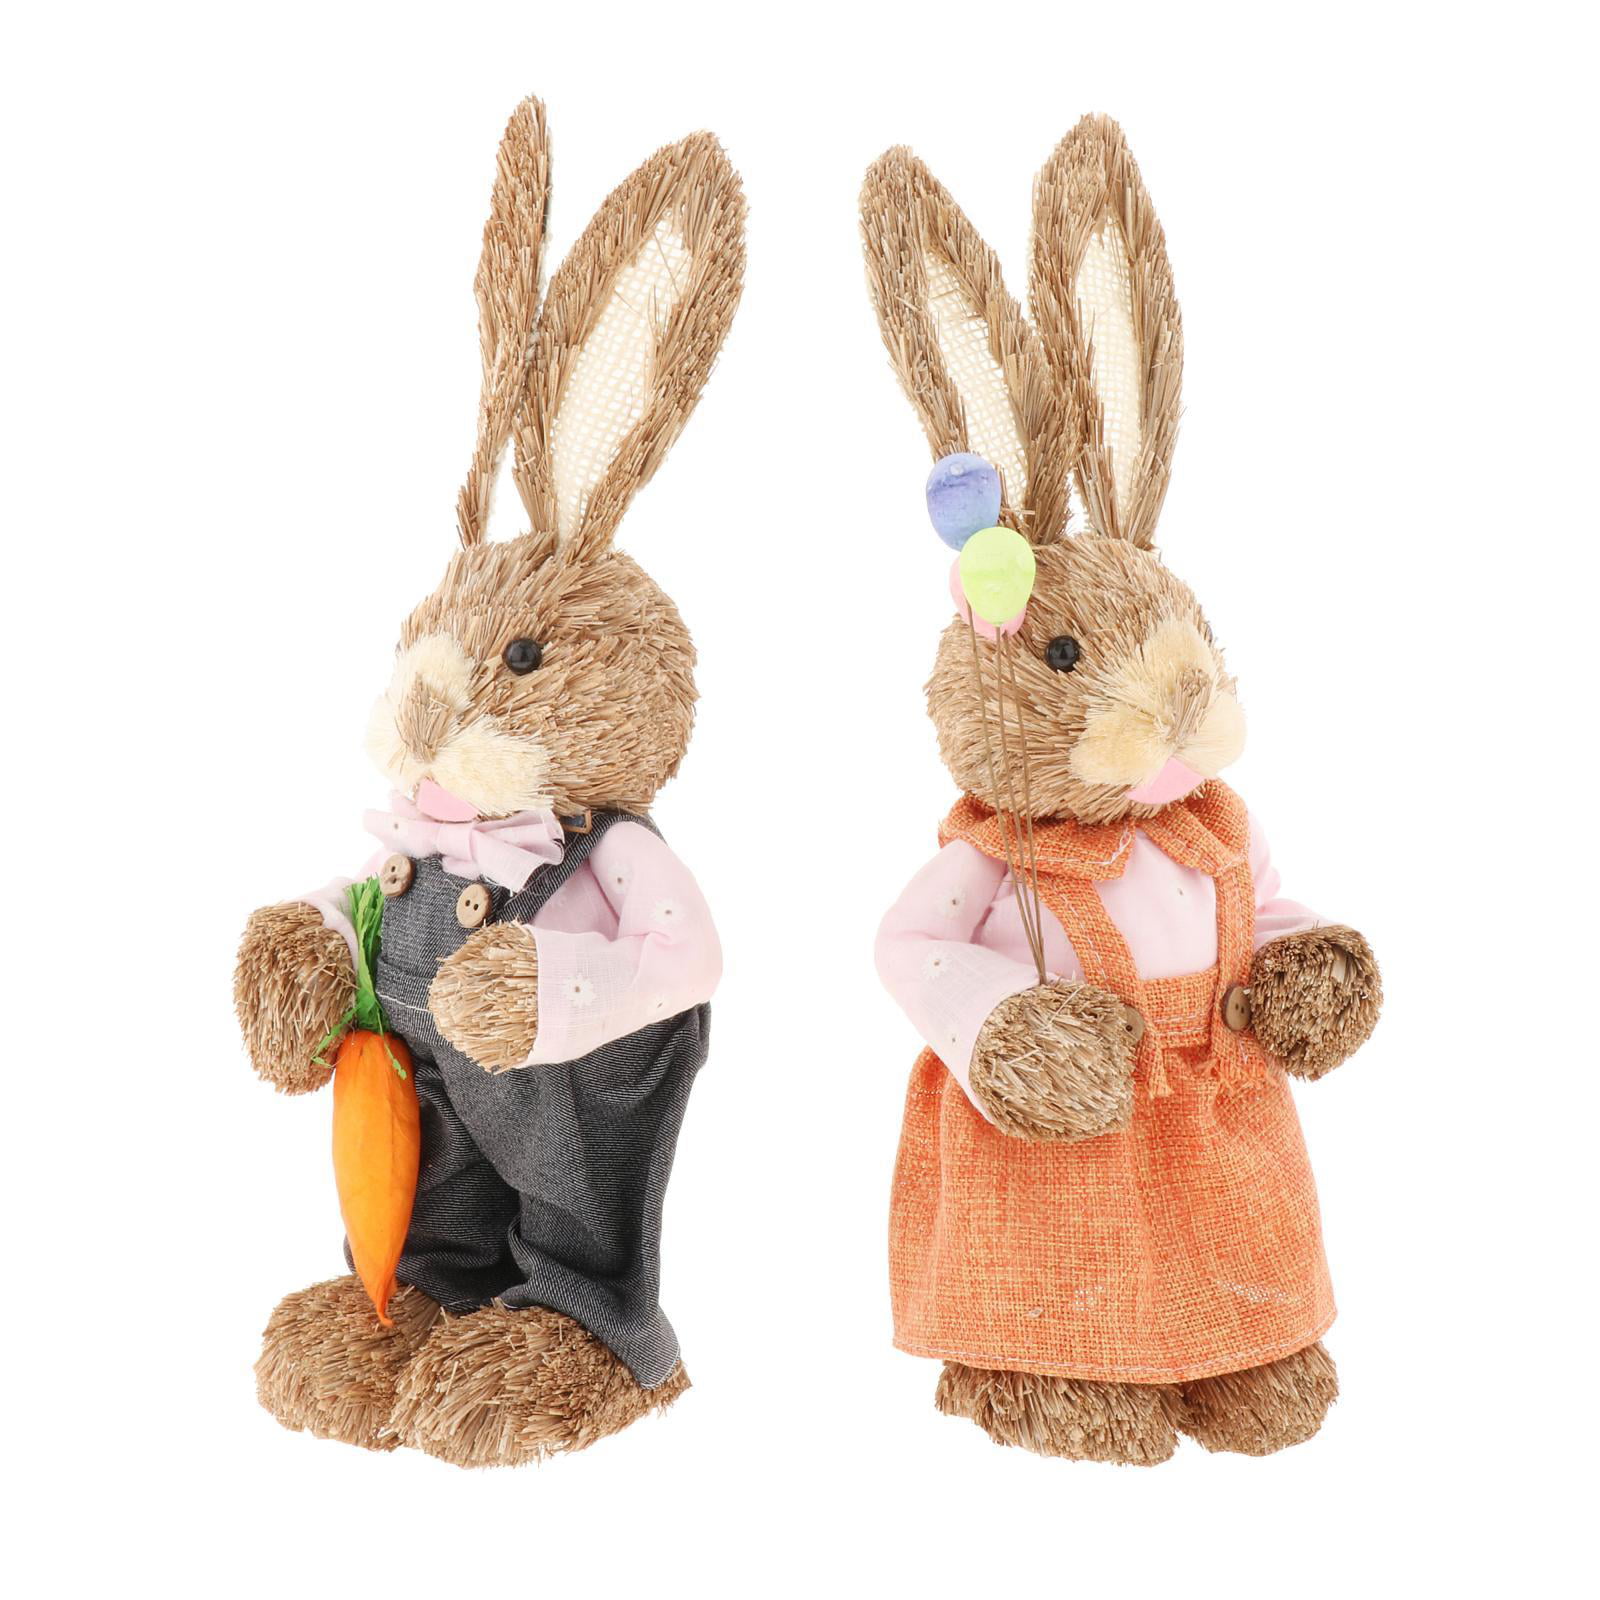 35cm Traditional Straw Easter Bunny Rabbit Home Decoration Blue Jacket Tie Boy 